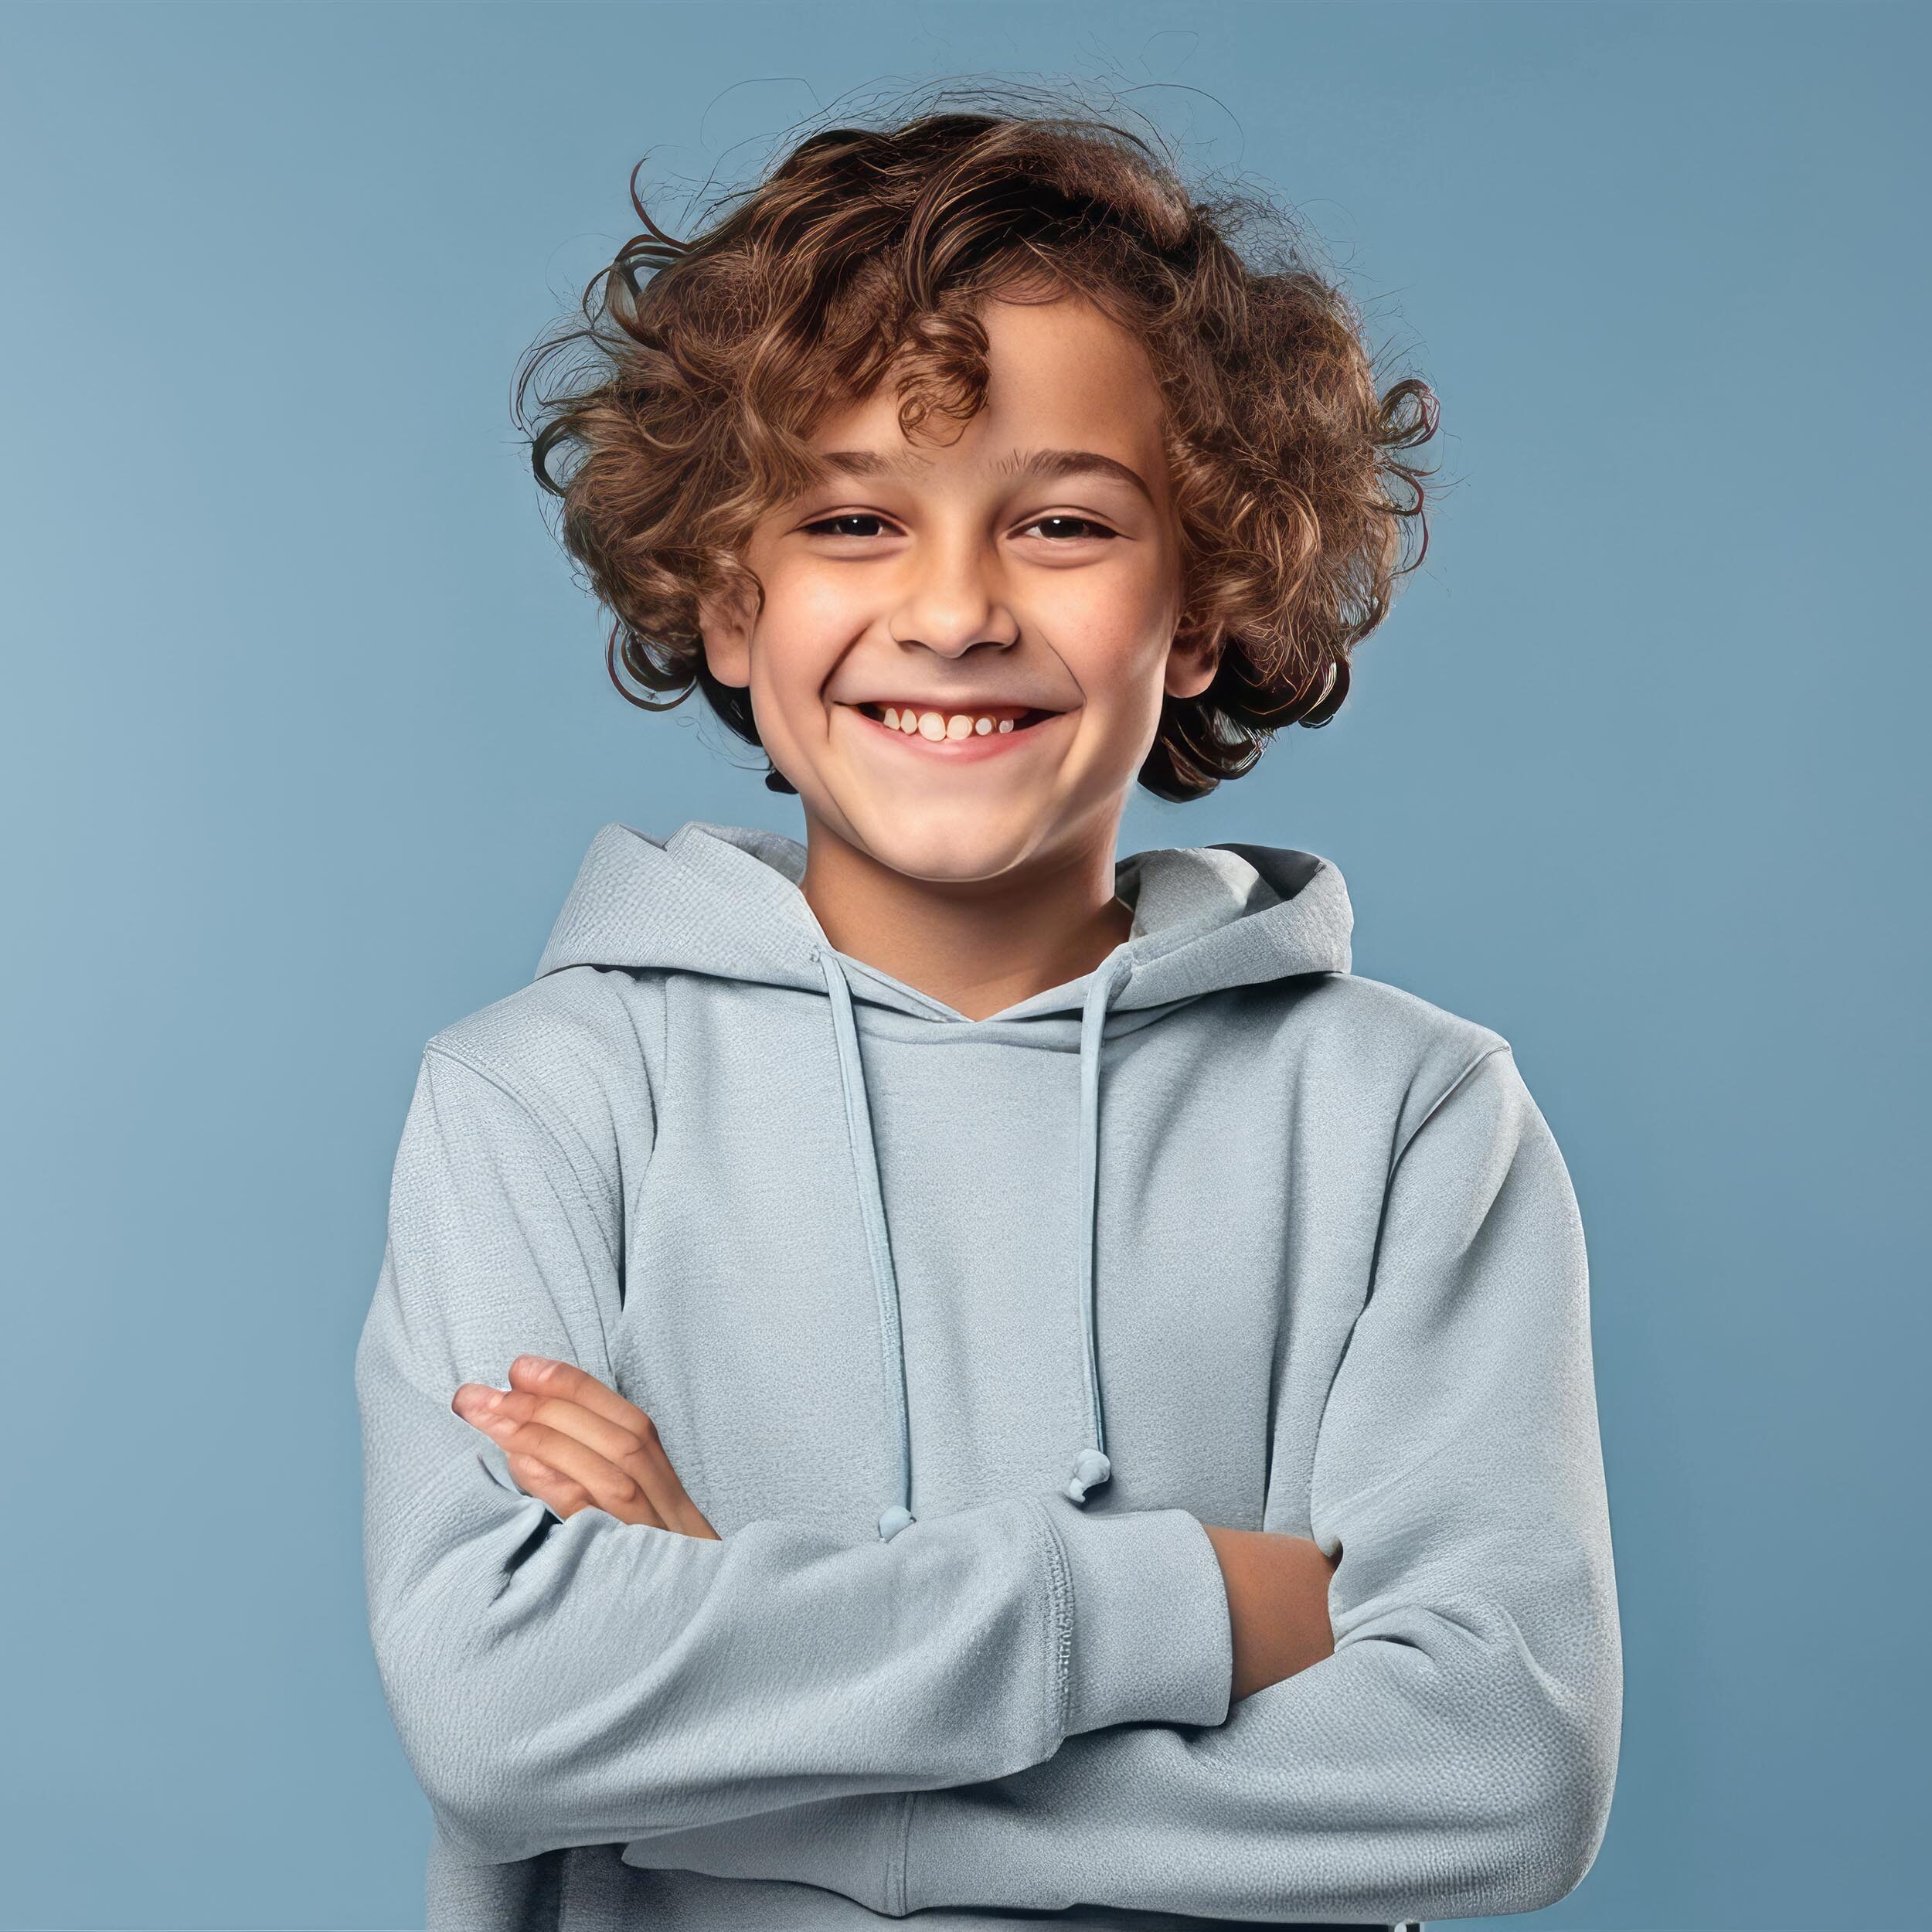 A happy boy with curly hair wearing a blue hoodie, smiling after receiving root canals.